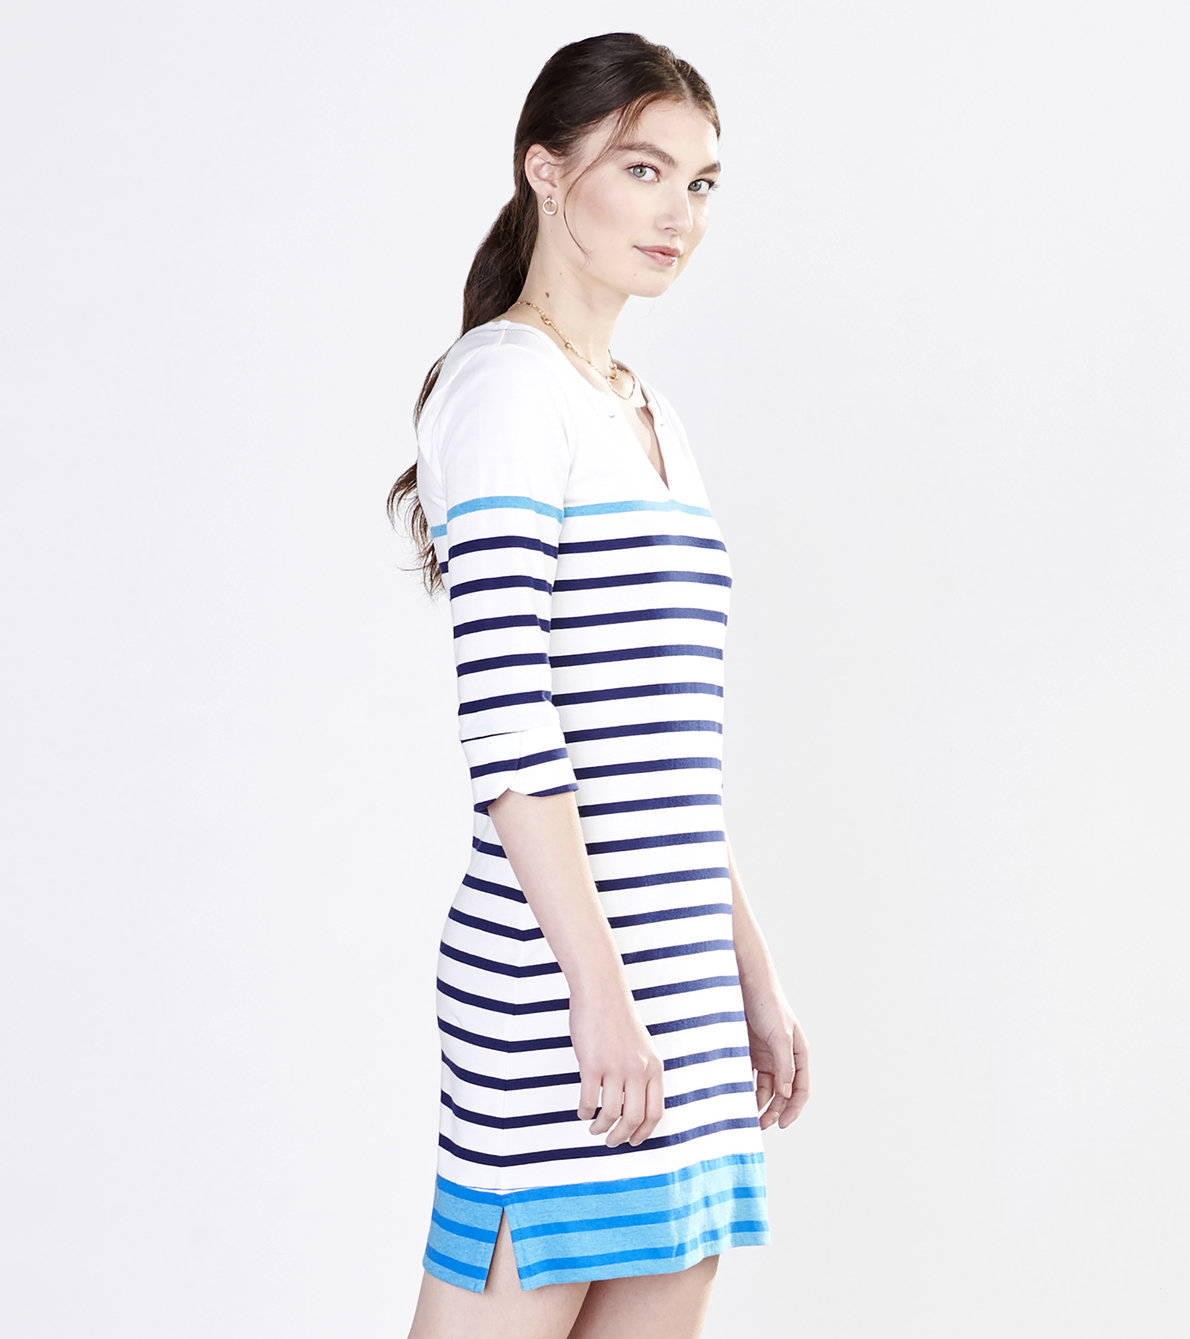 View larger image of Lucy Dress - French Girl Stripes